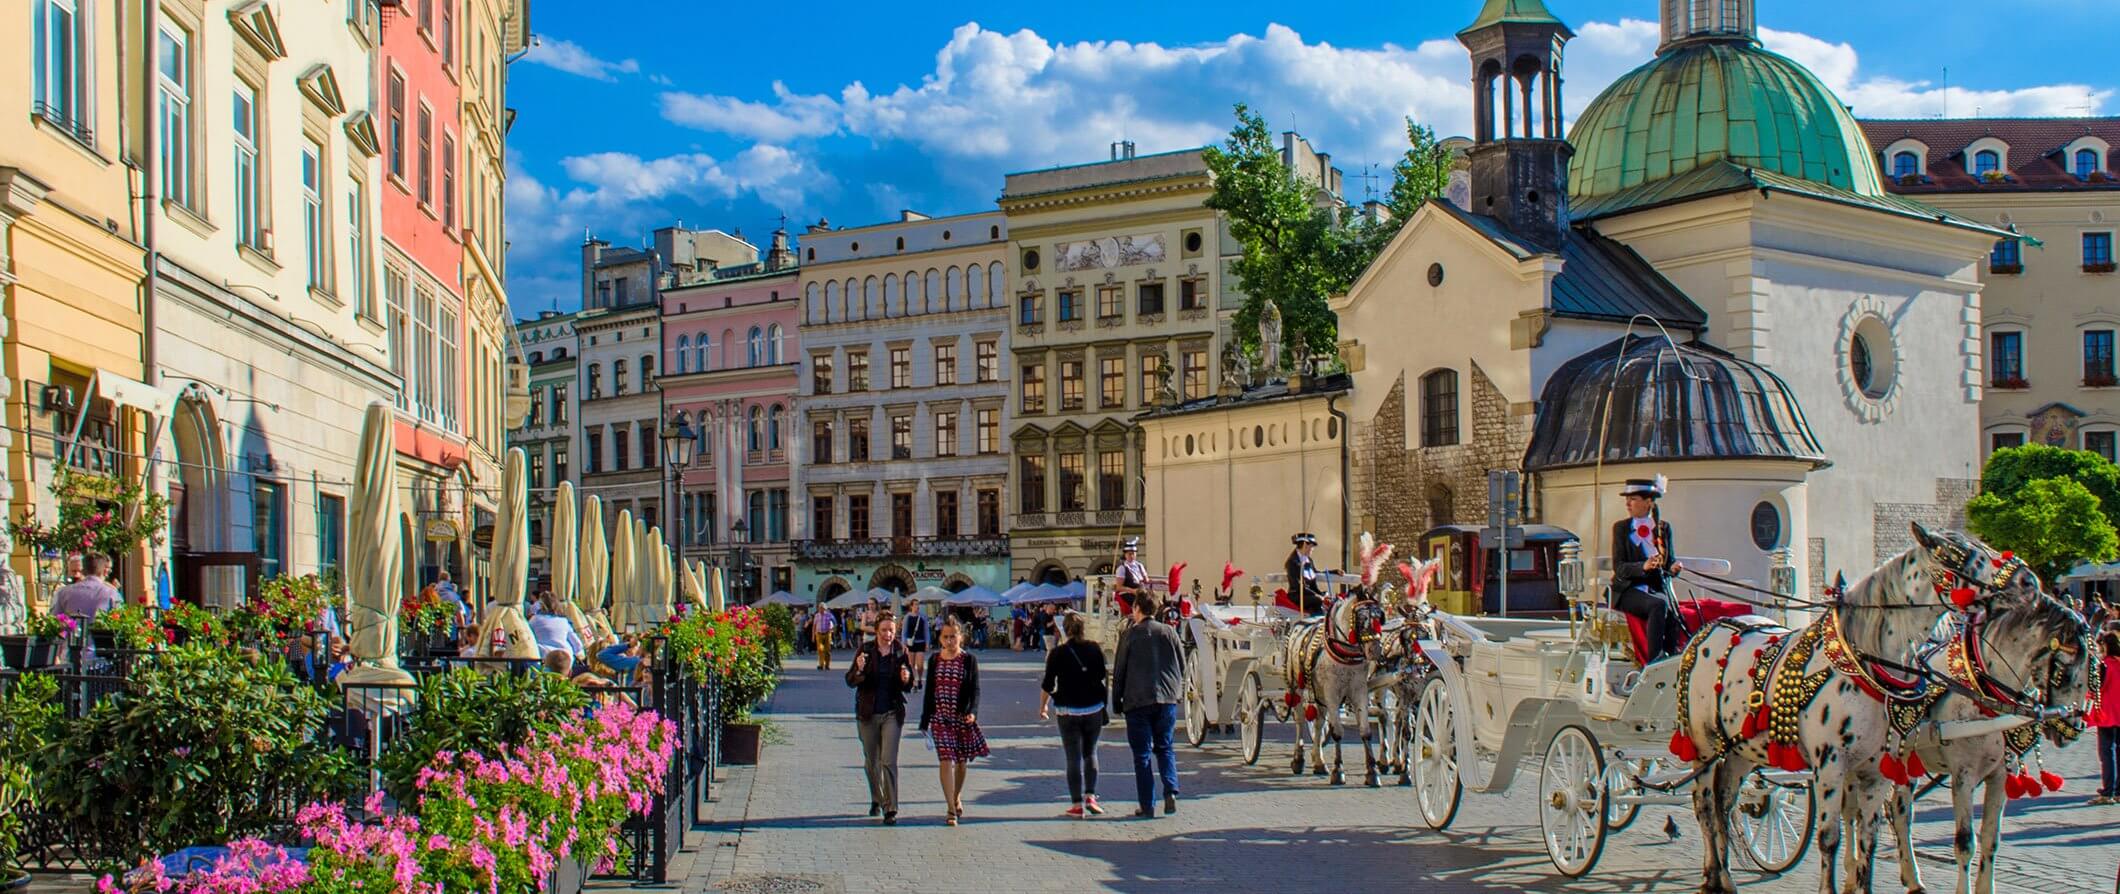 city view of Krakow in Poland. People walking the street and horse and carts lines up waiting.